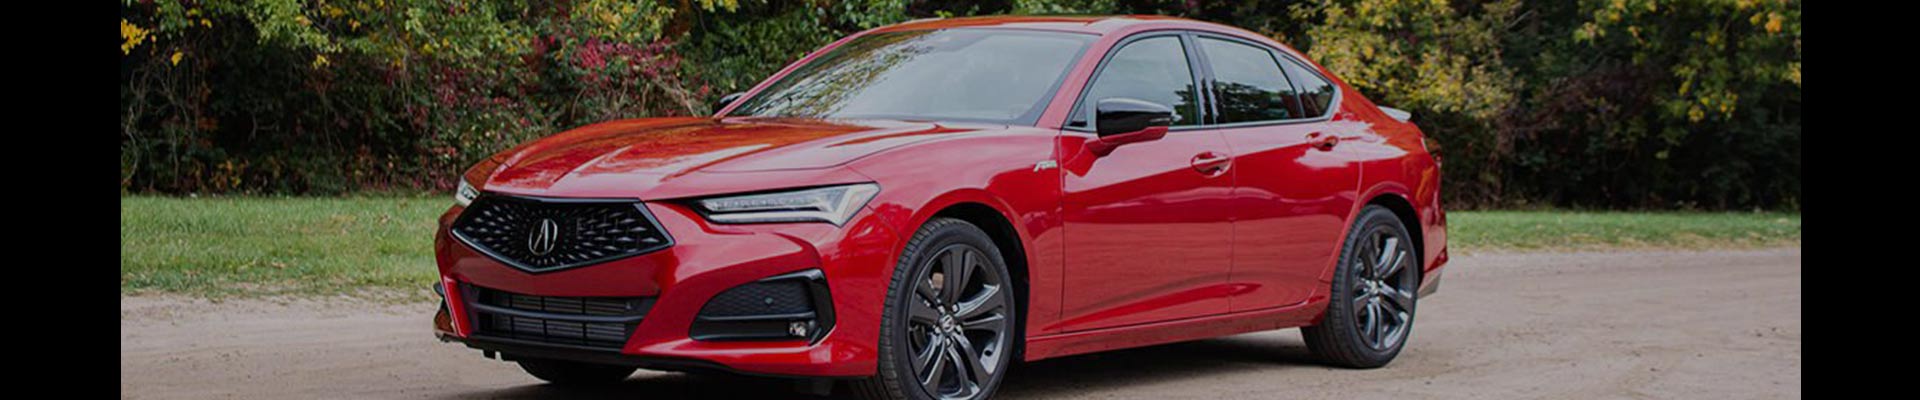 Shop Replacement and OEM 2019 Acura TLX Parts with Discounted Price on the Net